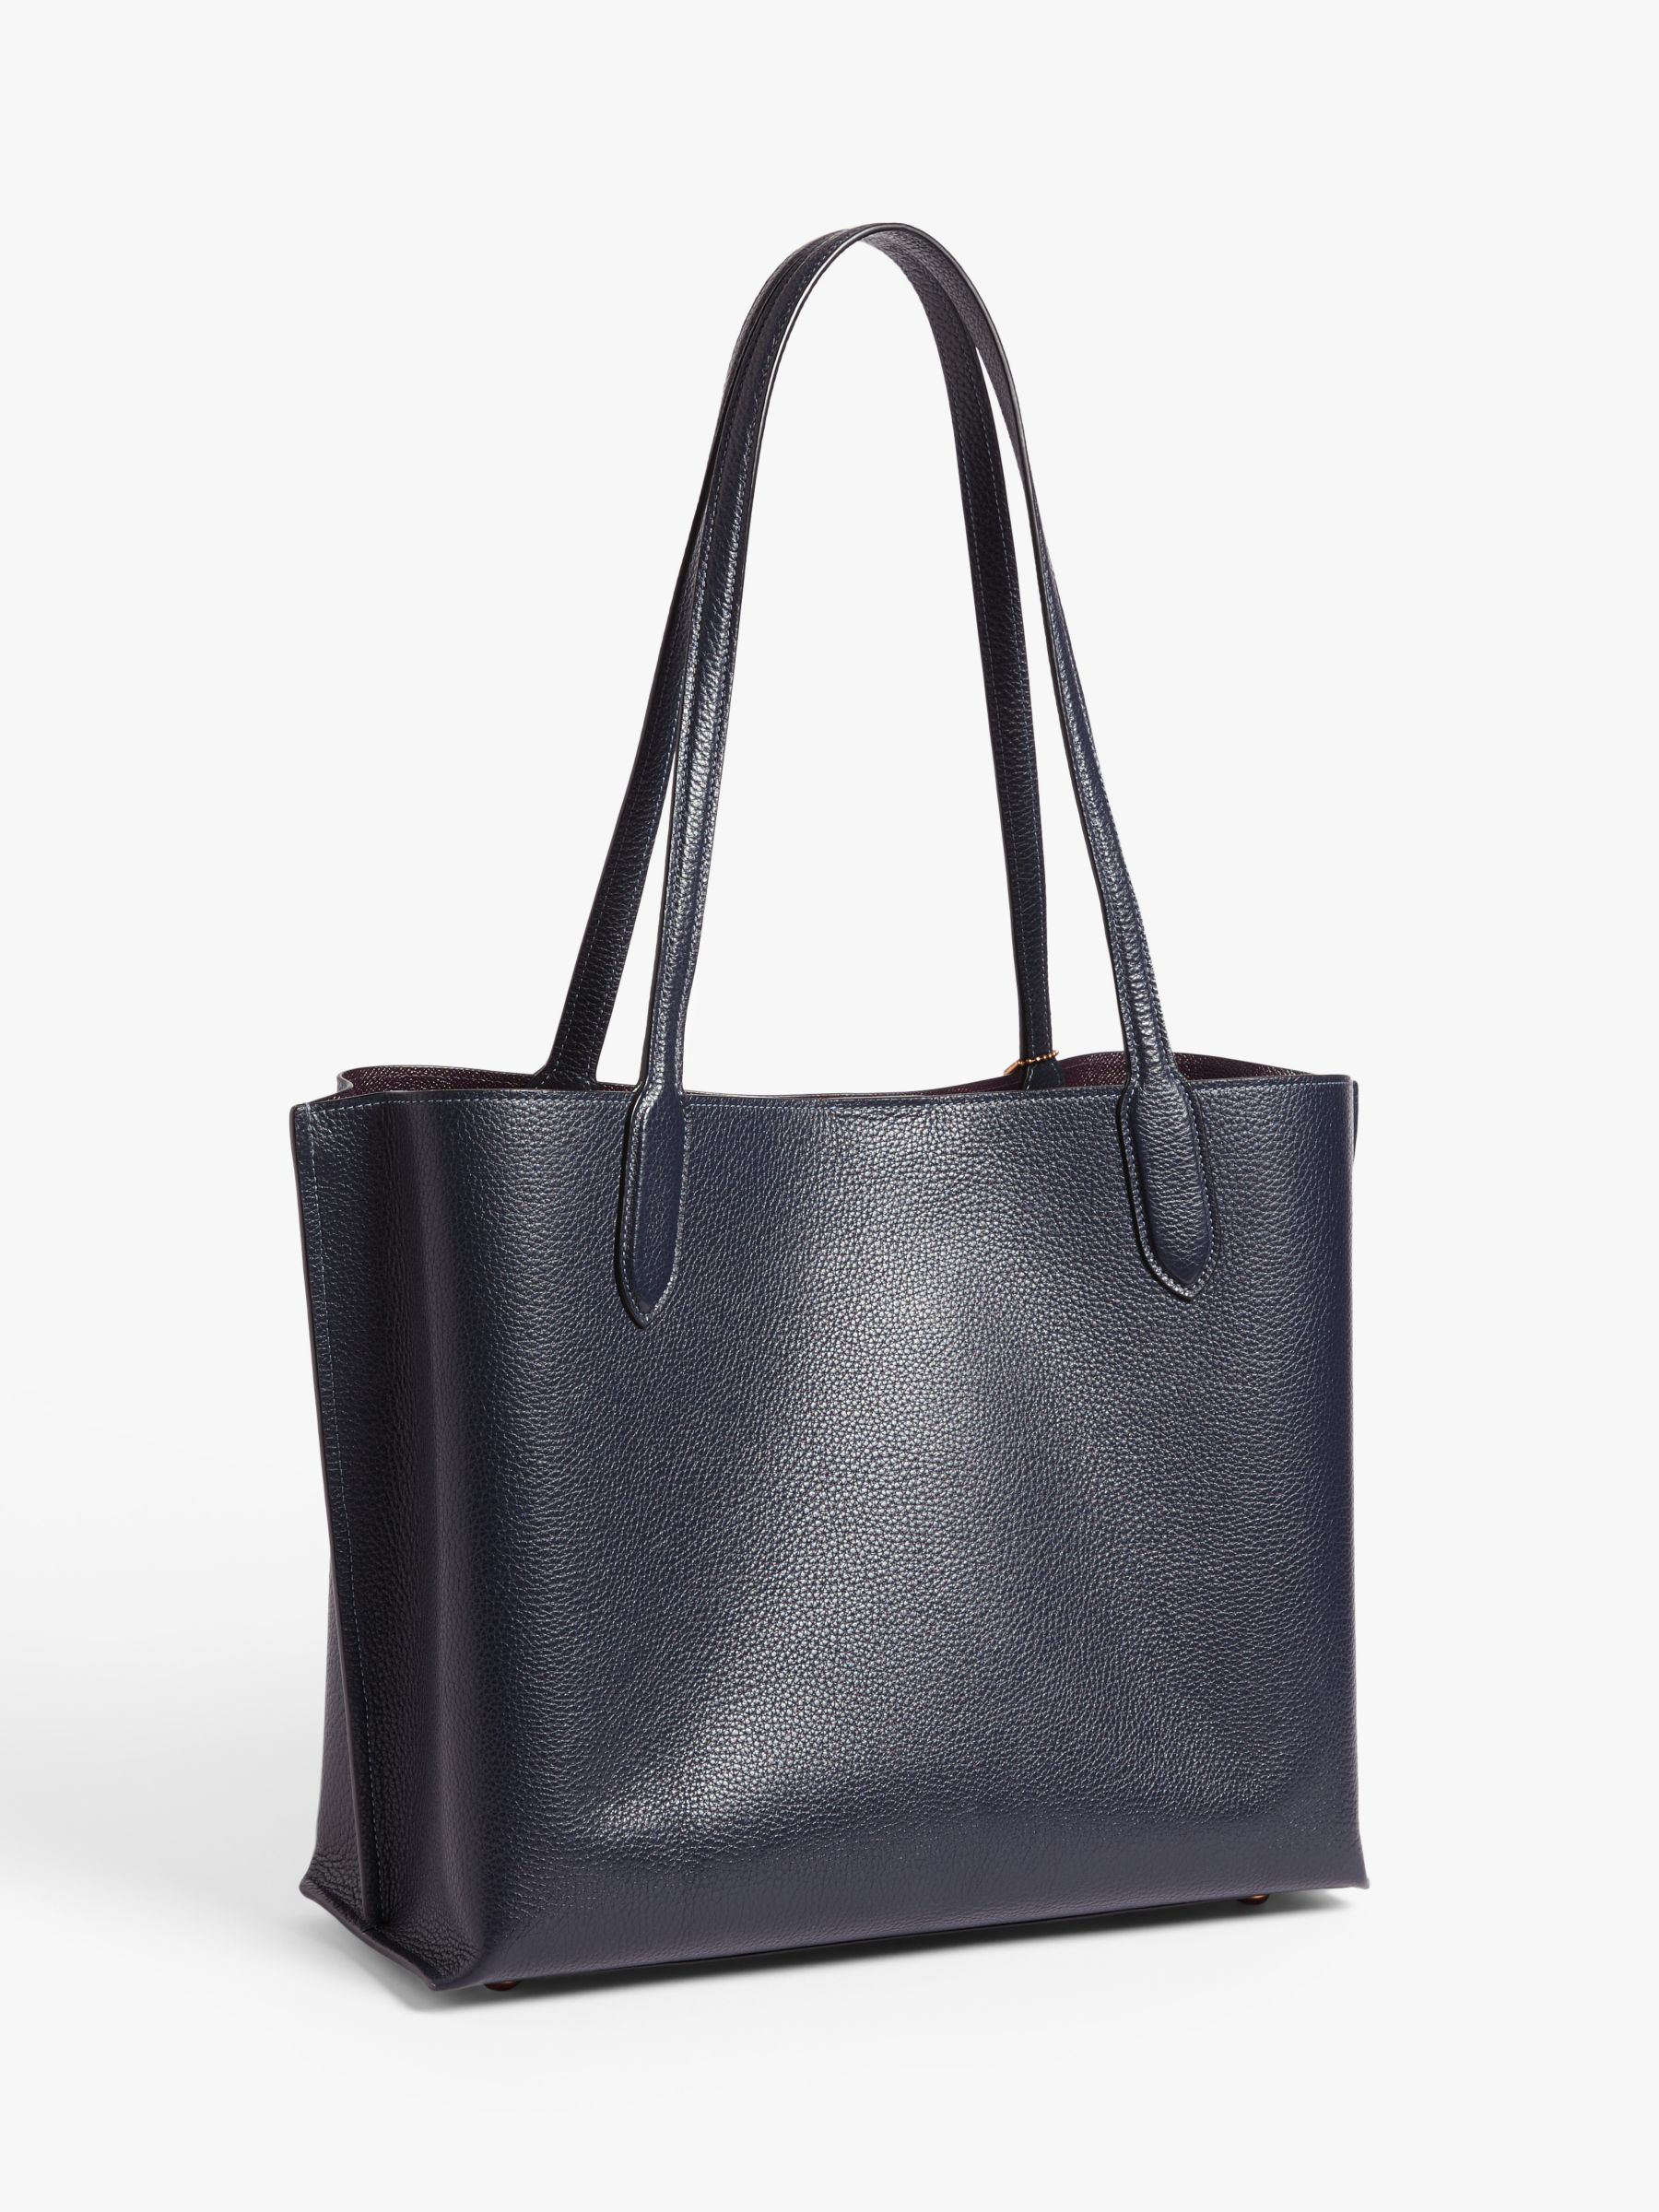 Coach Willow Leather Tote Bag, Navy at John Lewis & Partners